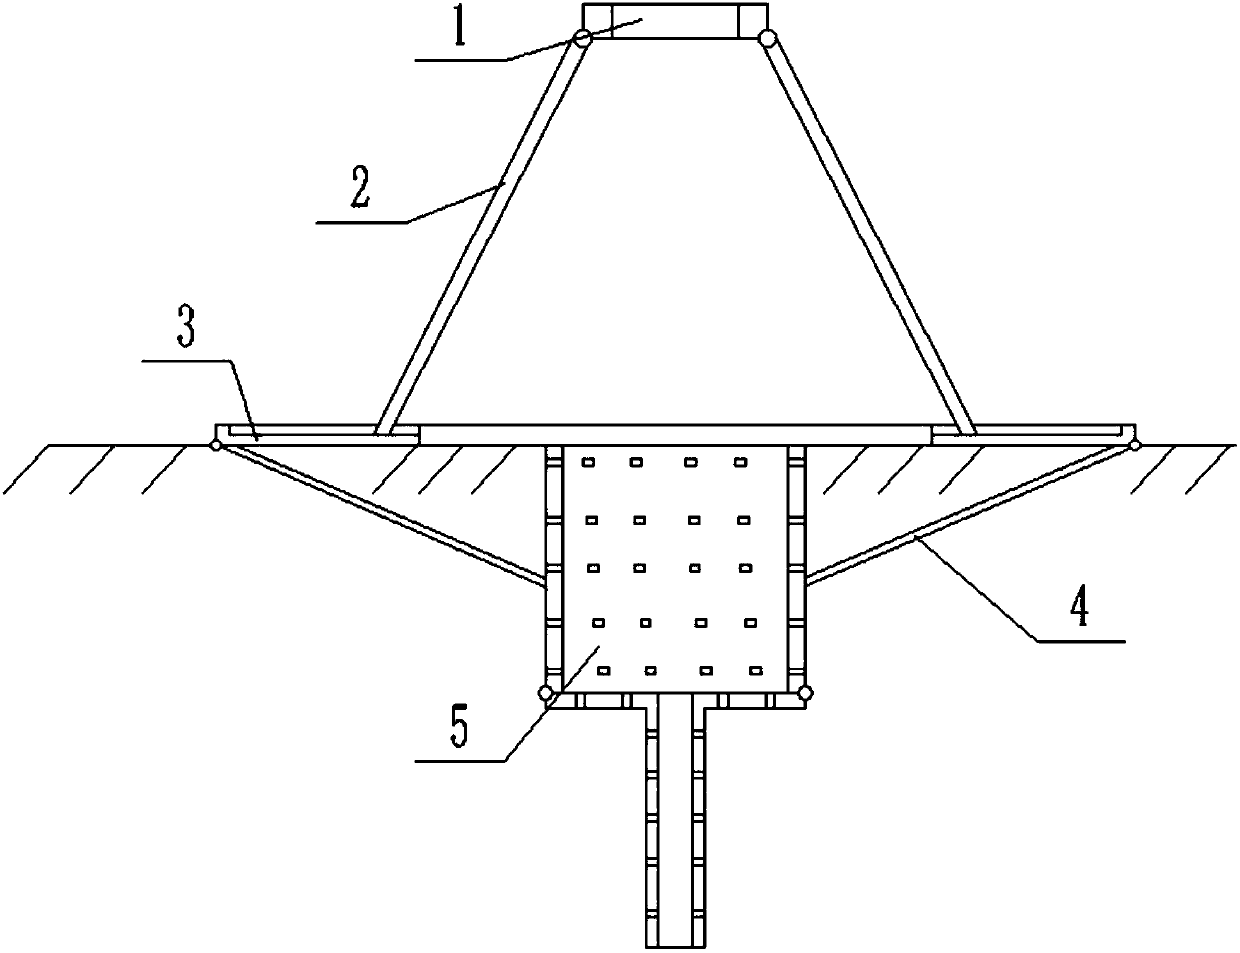 Supporting device for planting plants in gardens